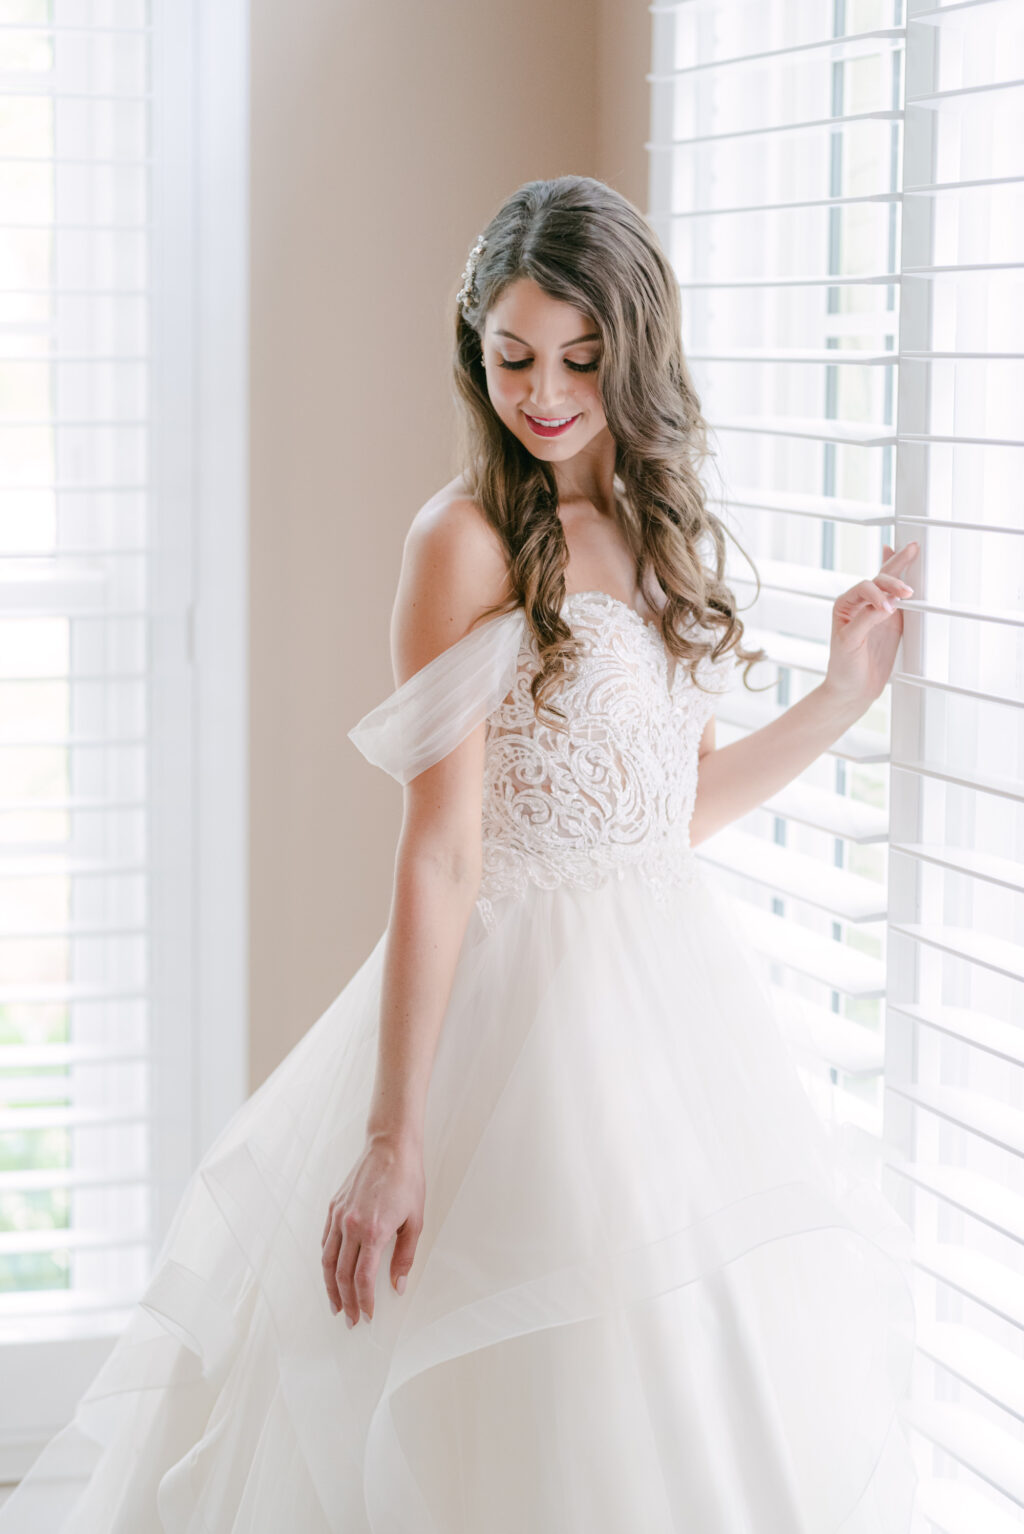 Sweetheart Off the Shoulder A-Line Ballgown Wedding Dress Ideas | Bride Getting Ready with Bridesmaids Wedding Portrait | Tampa Hair and Makeup Artist Femme Akoi Beauty Studio